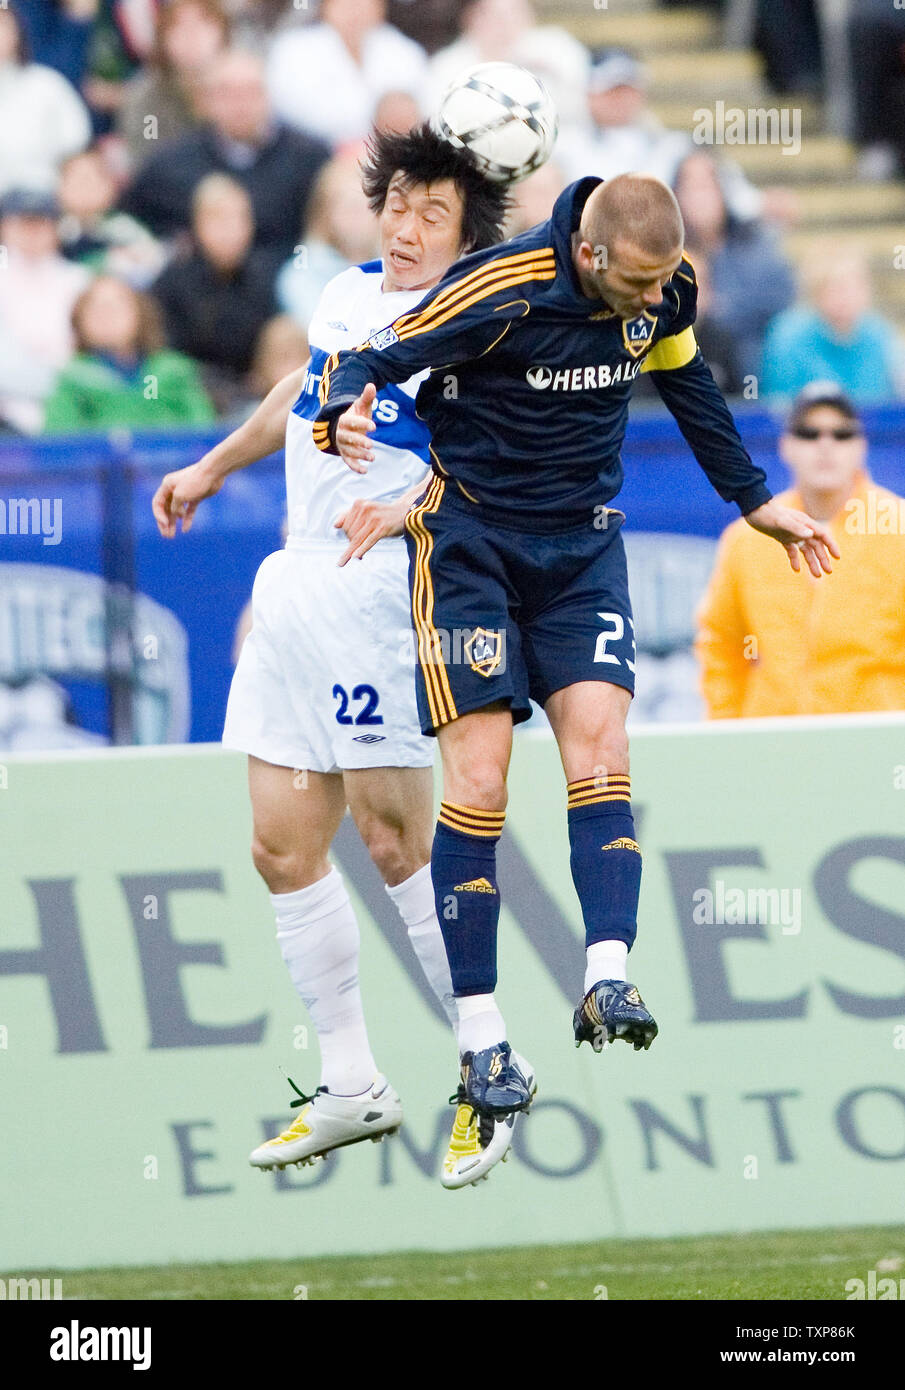 David Beckham (R) of the LA Galaxy heads the ball beside Vancouver Whitecaps Takashi Hirano from Japan during the first half of an exhibition soccer game at Commonwealth Stadium in Edmonton, Alberta, on May 13, 2008.  (UPI Photo/Heinz Ruckemann) Stock Photo